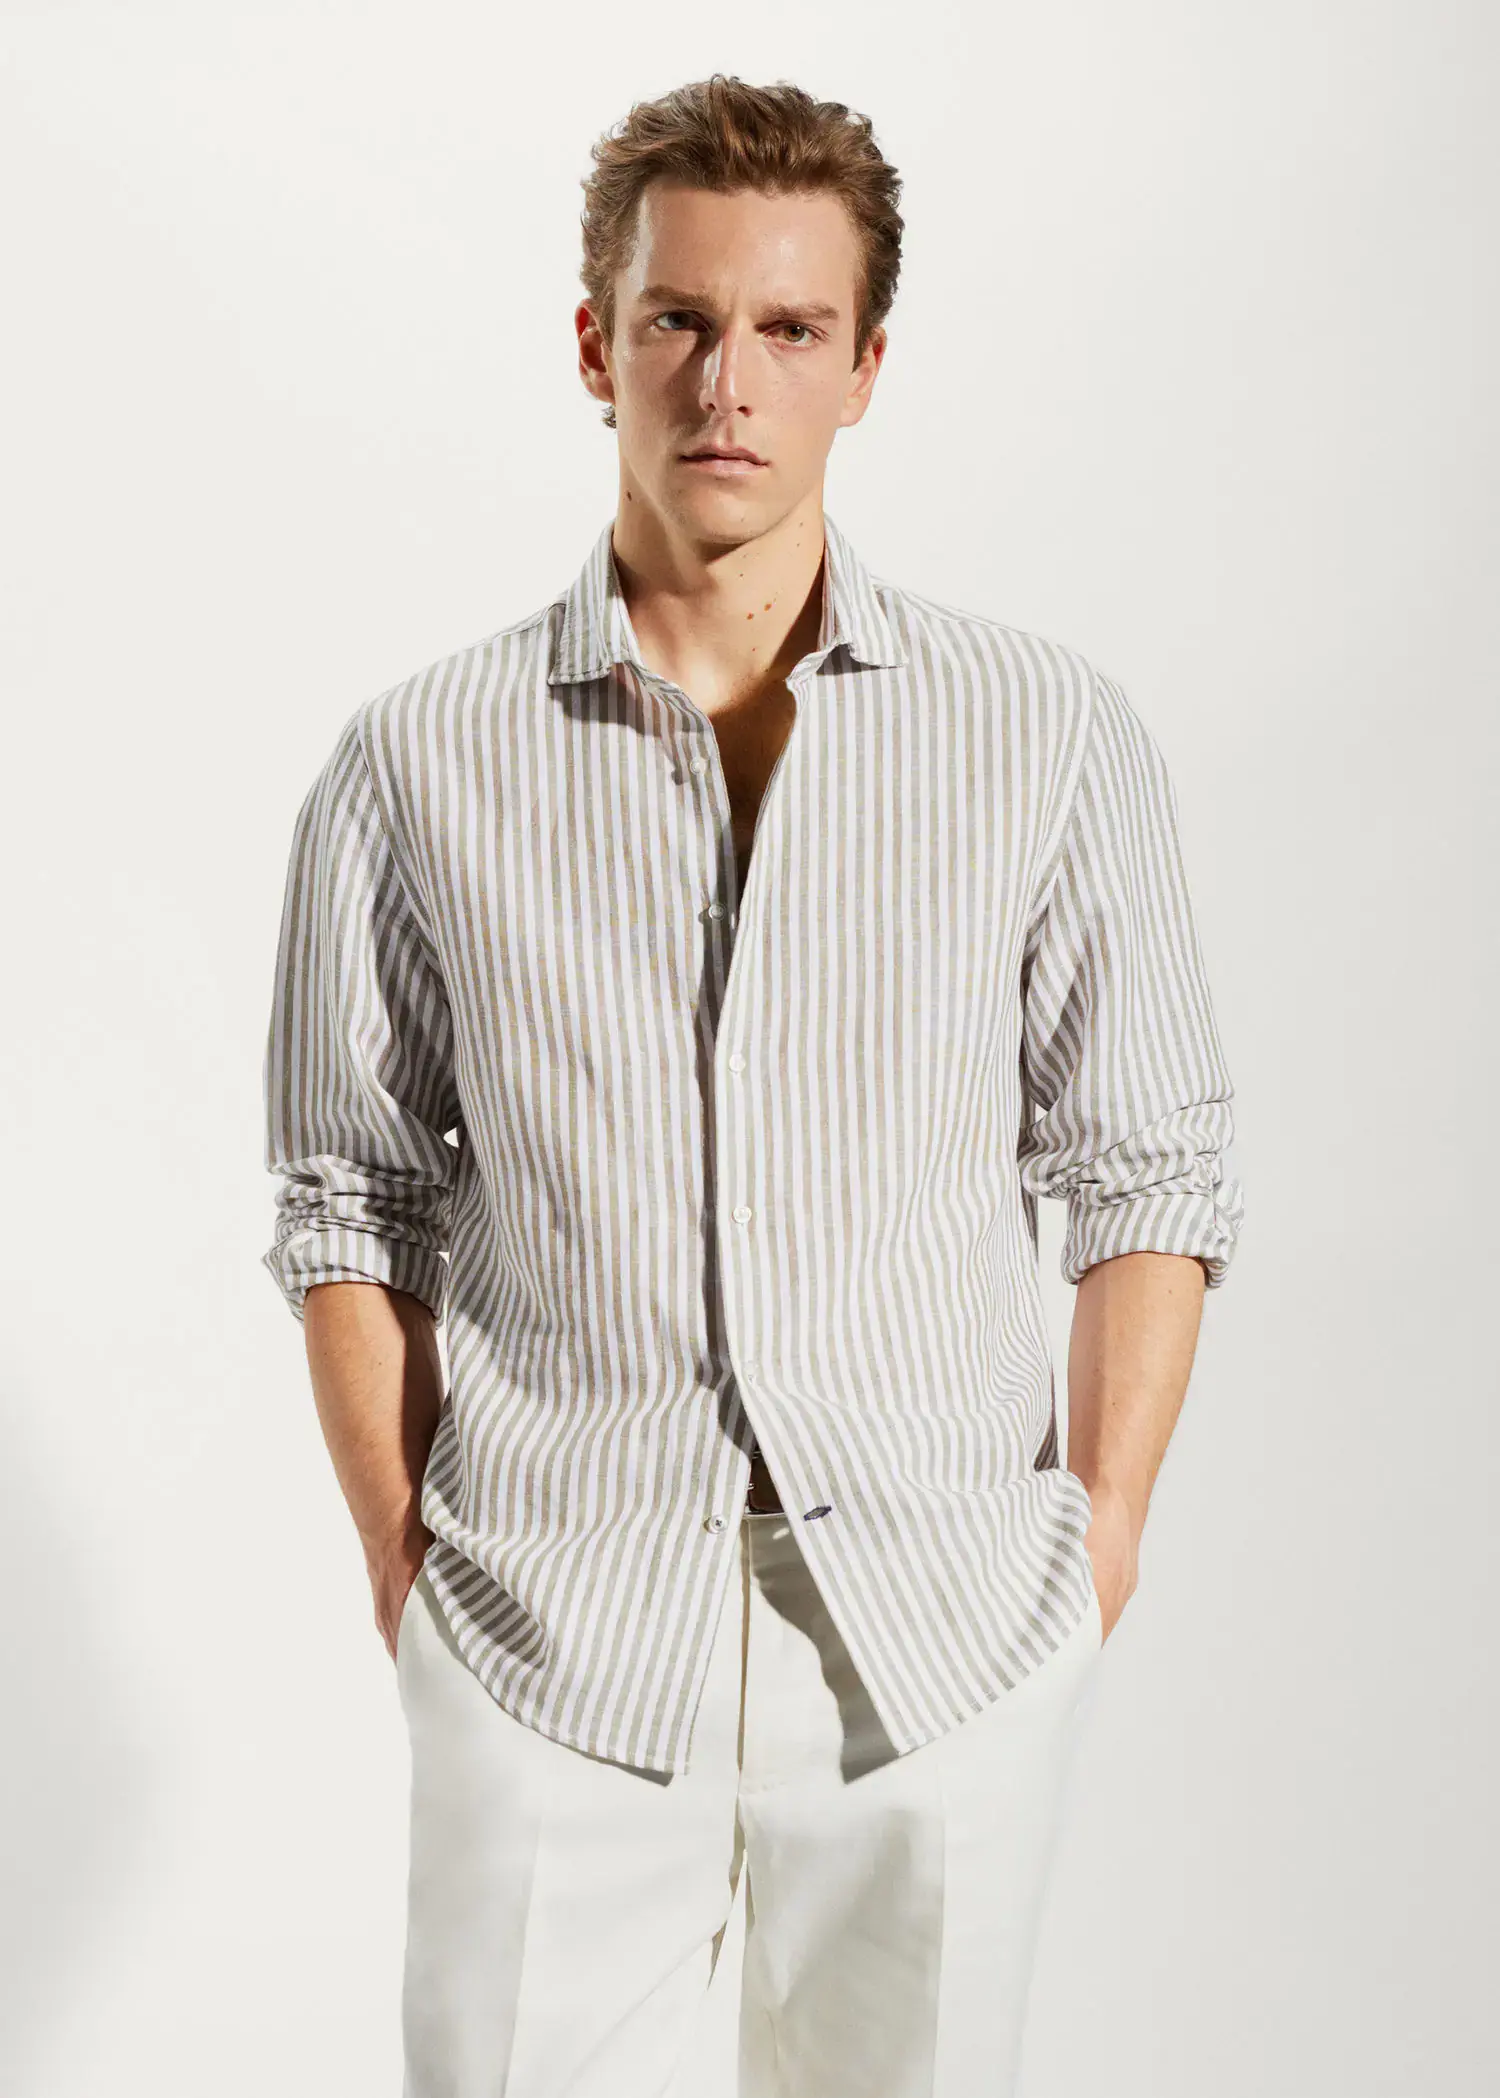 Mango Slim fit striped linen shirt. a man in a striped shirt is standing with his hands in his pockets 